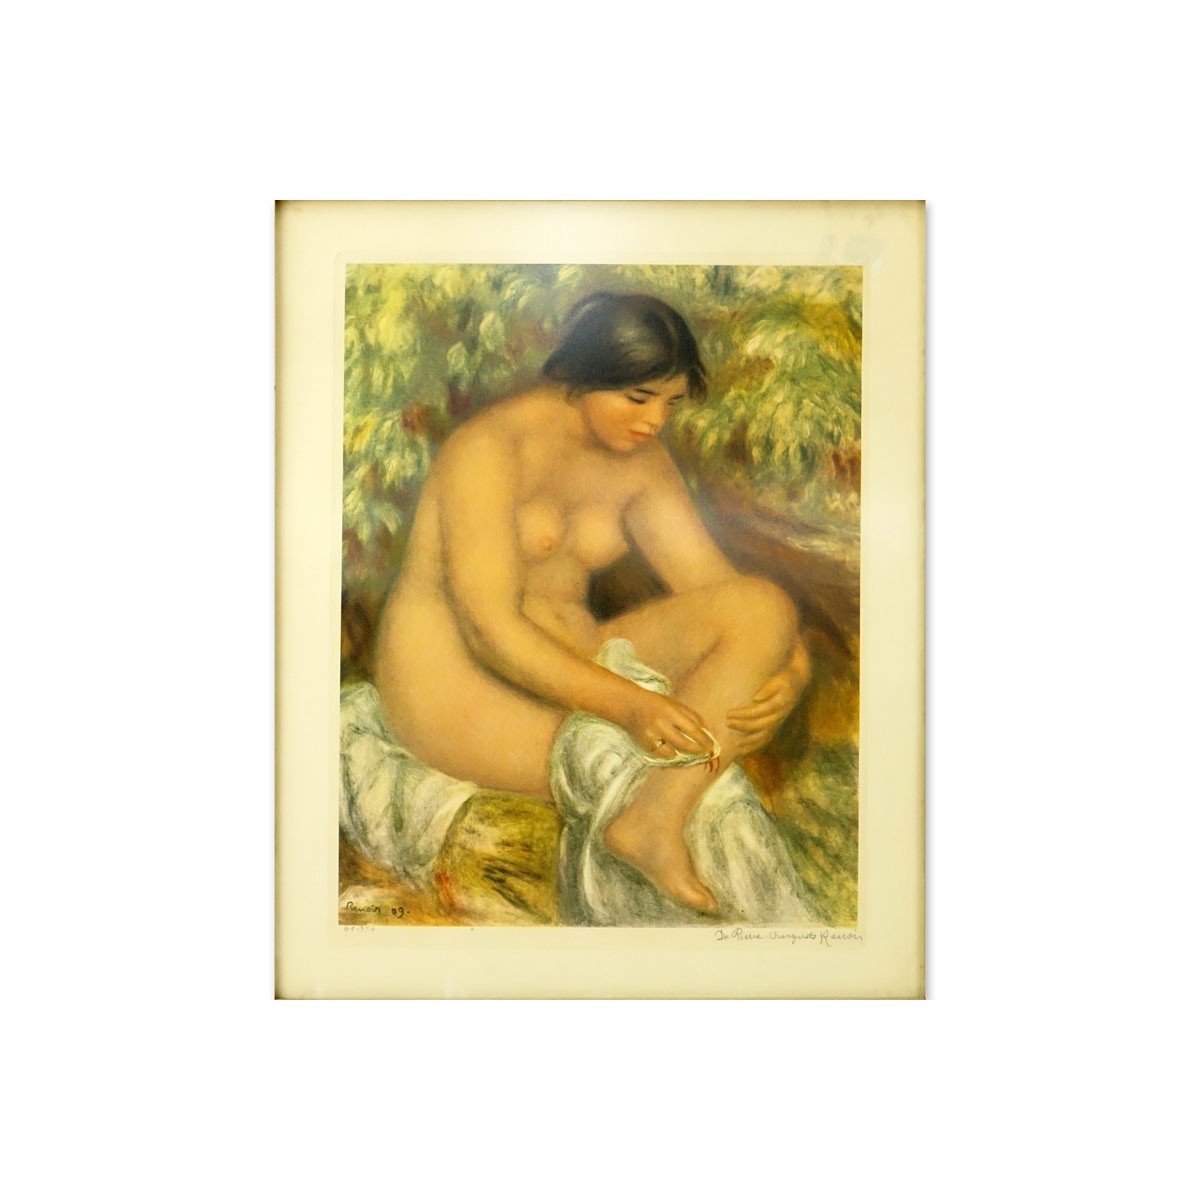 After: Pierre Renoir, French  (1841-1919) "Bather Wiping a Wound" Prints Signed and Numbered 47/350